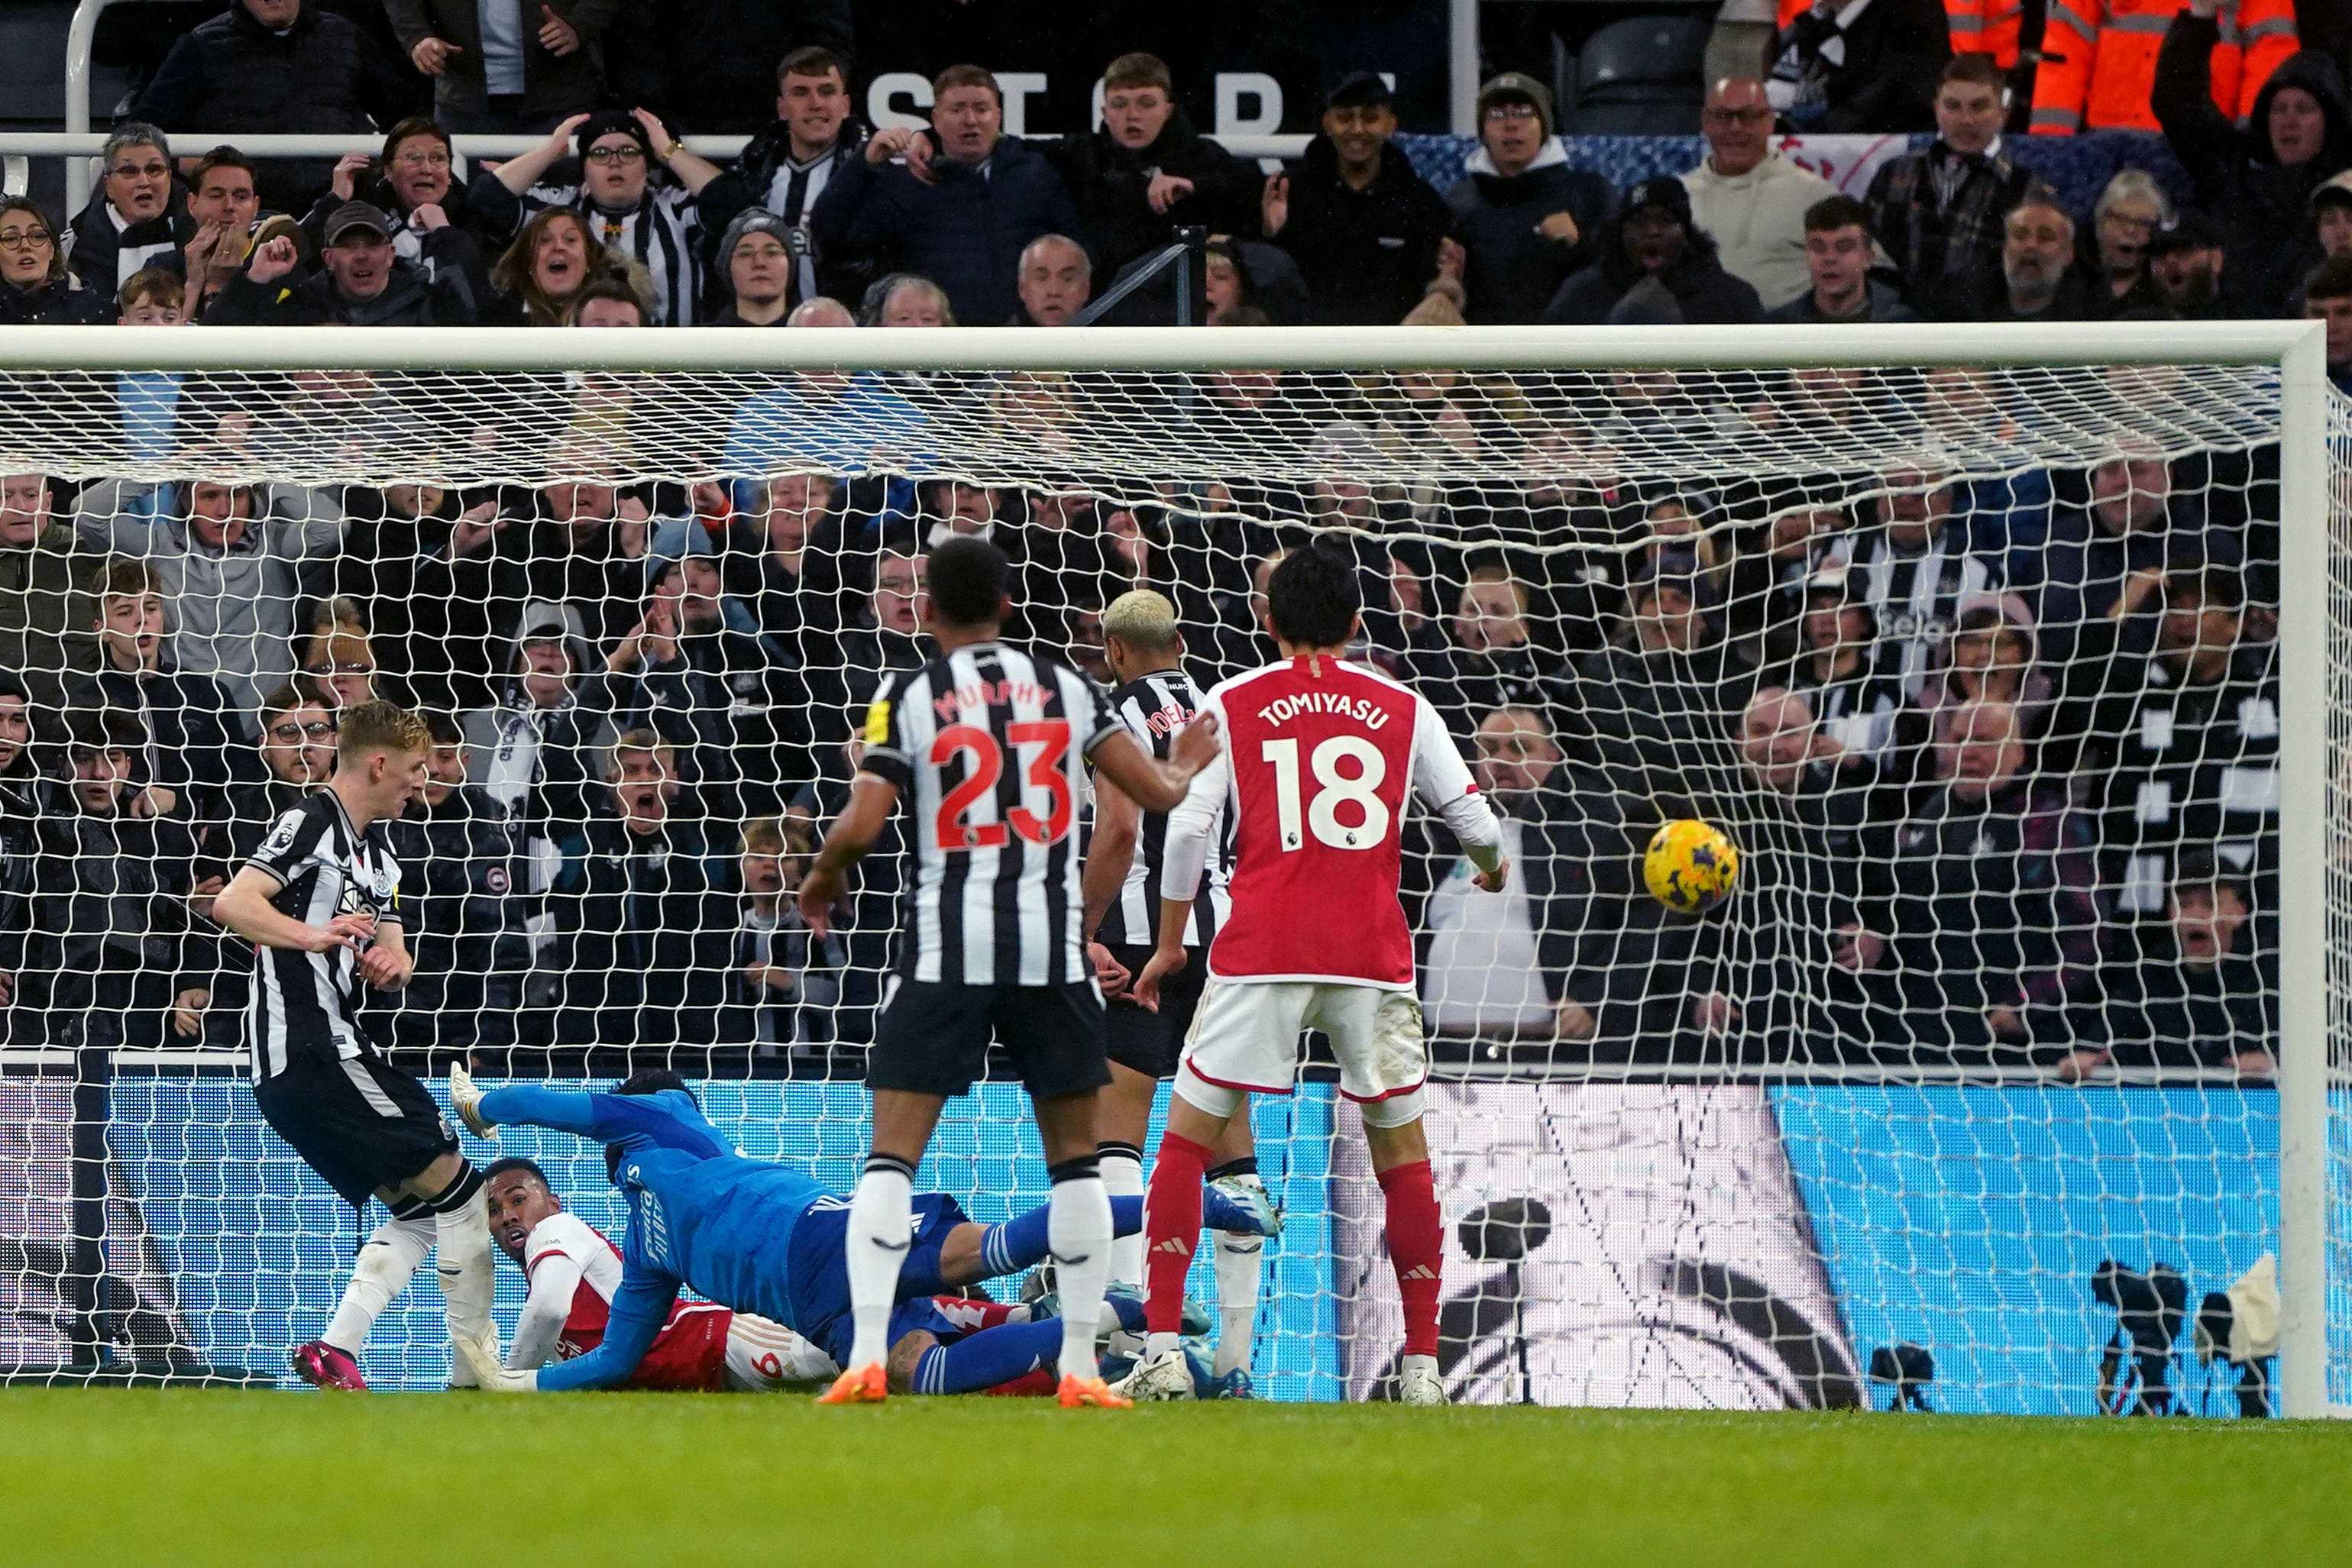 Anthony Gordon scored a controversial winner for Newcastle against Arsenal